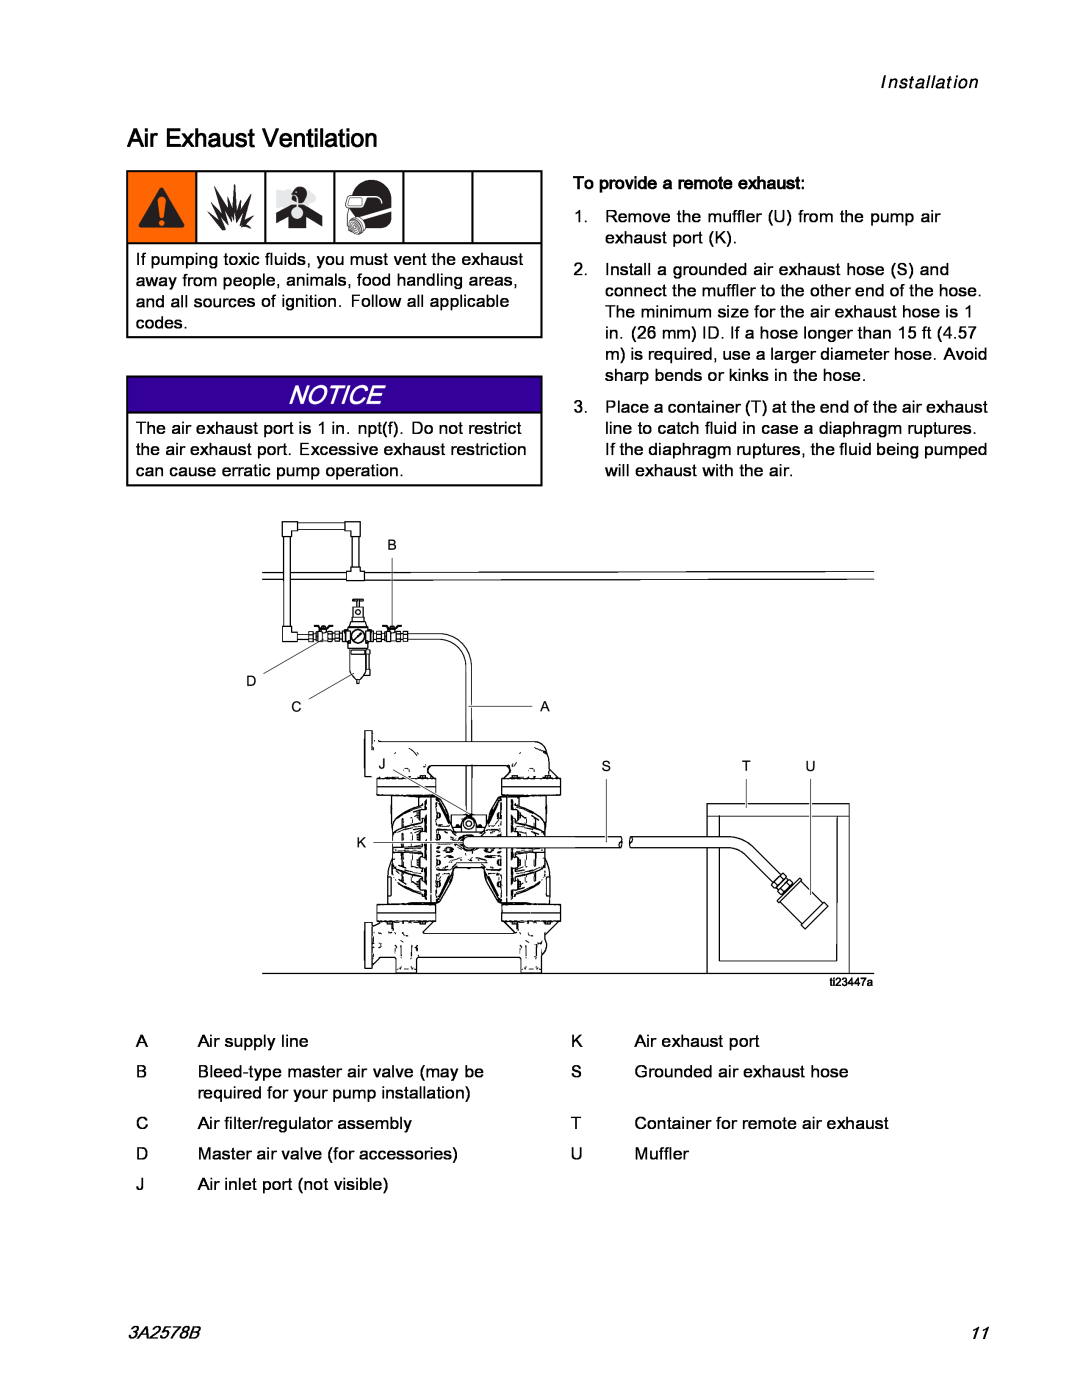 Graco 3A2578B important safety instructions Air Exhaust Ventilation, Notice, Installation, To provide a remote exhaust 